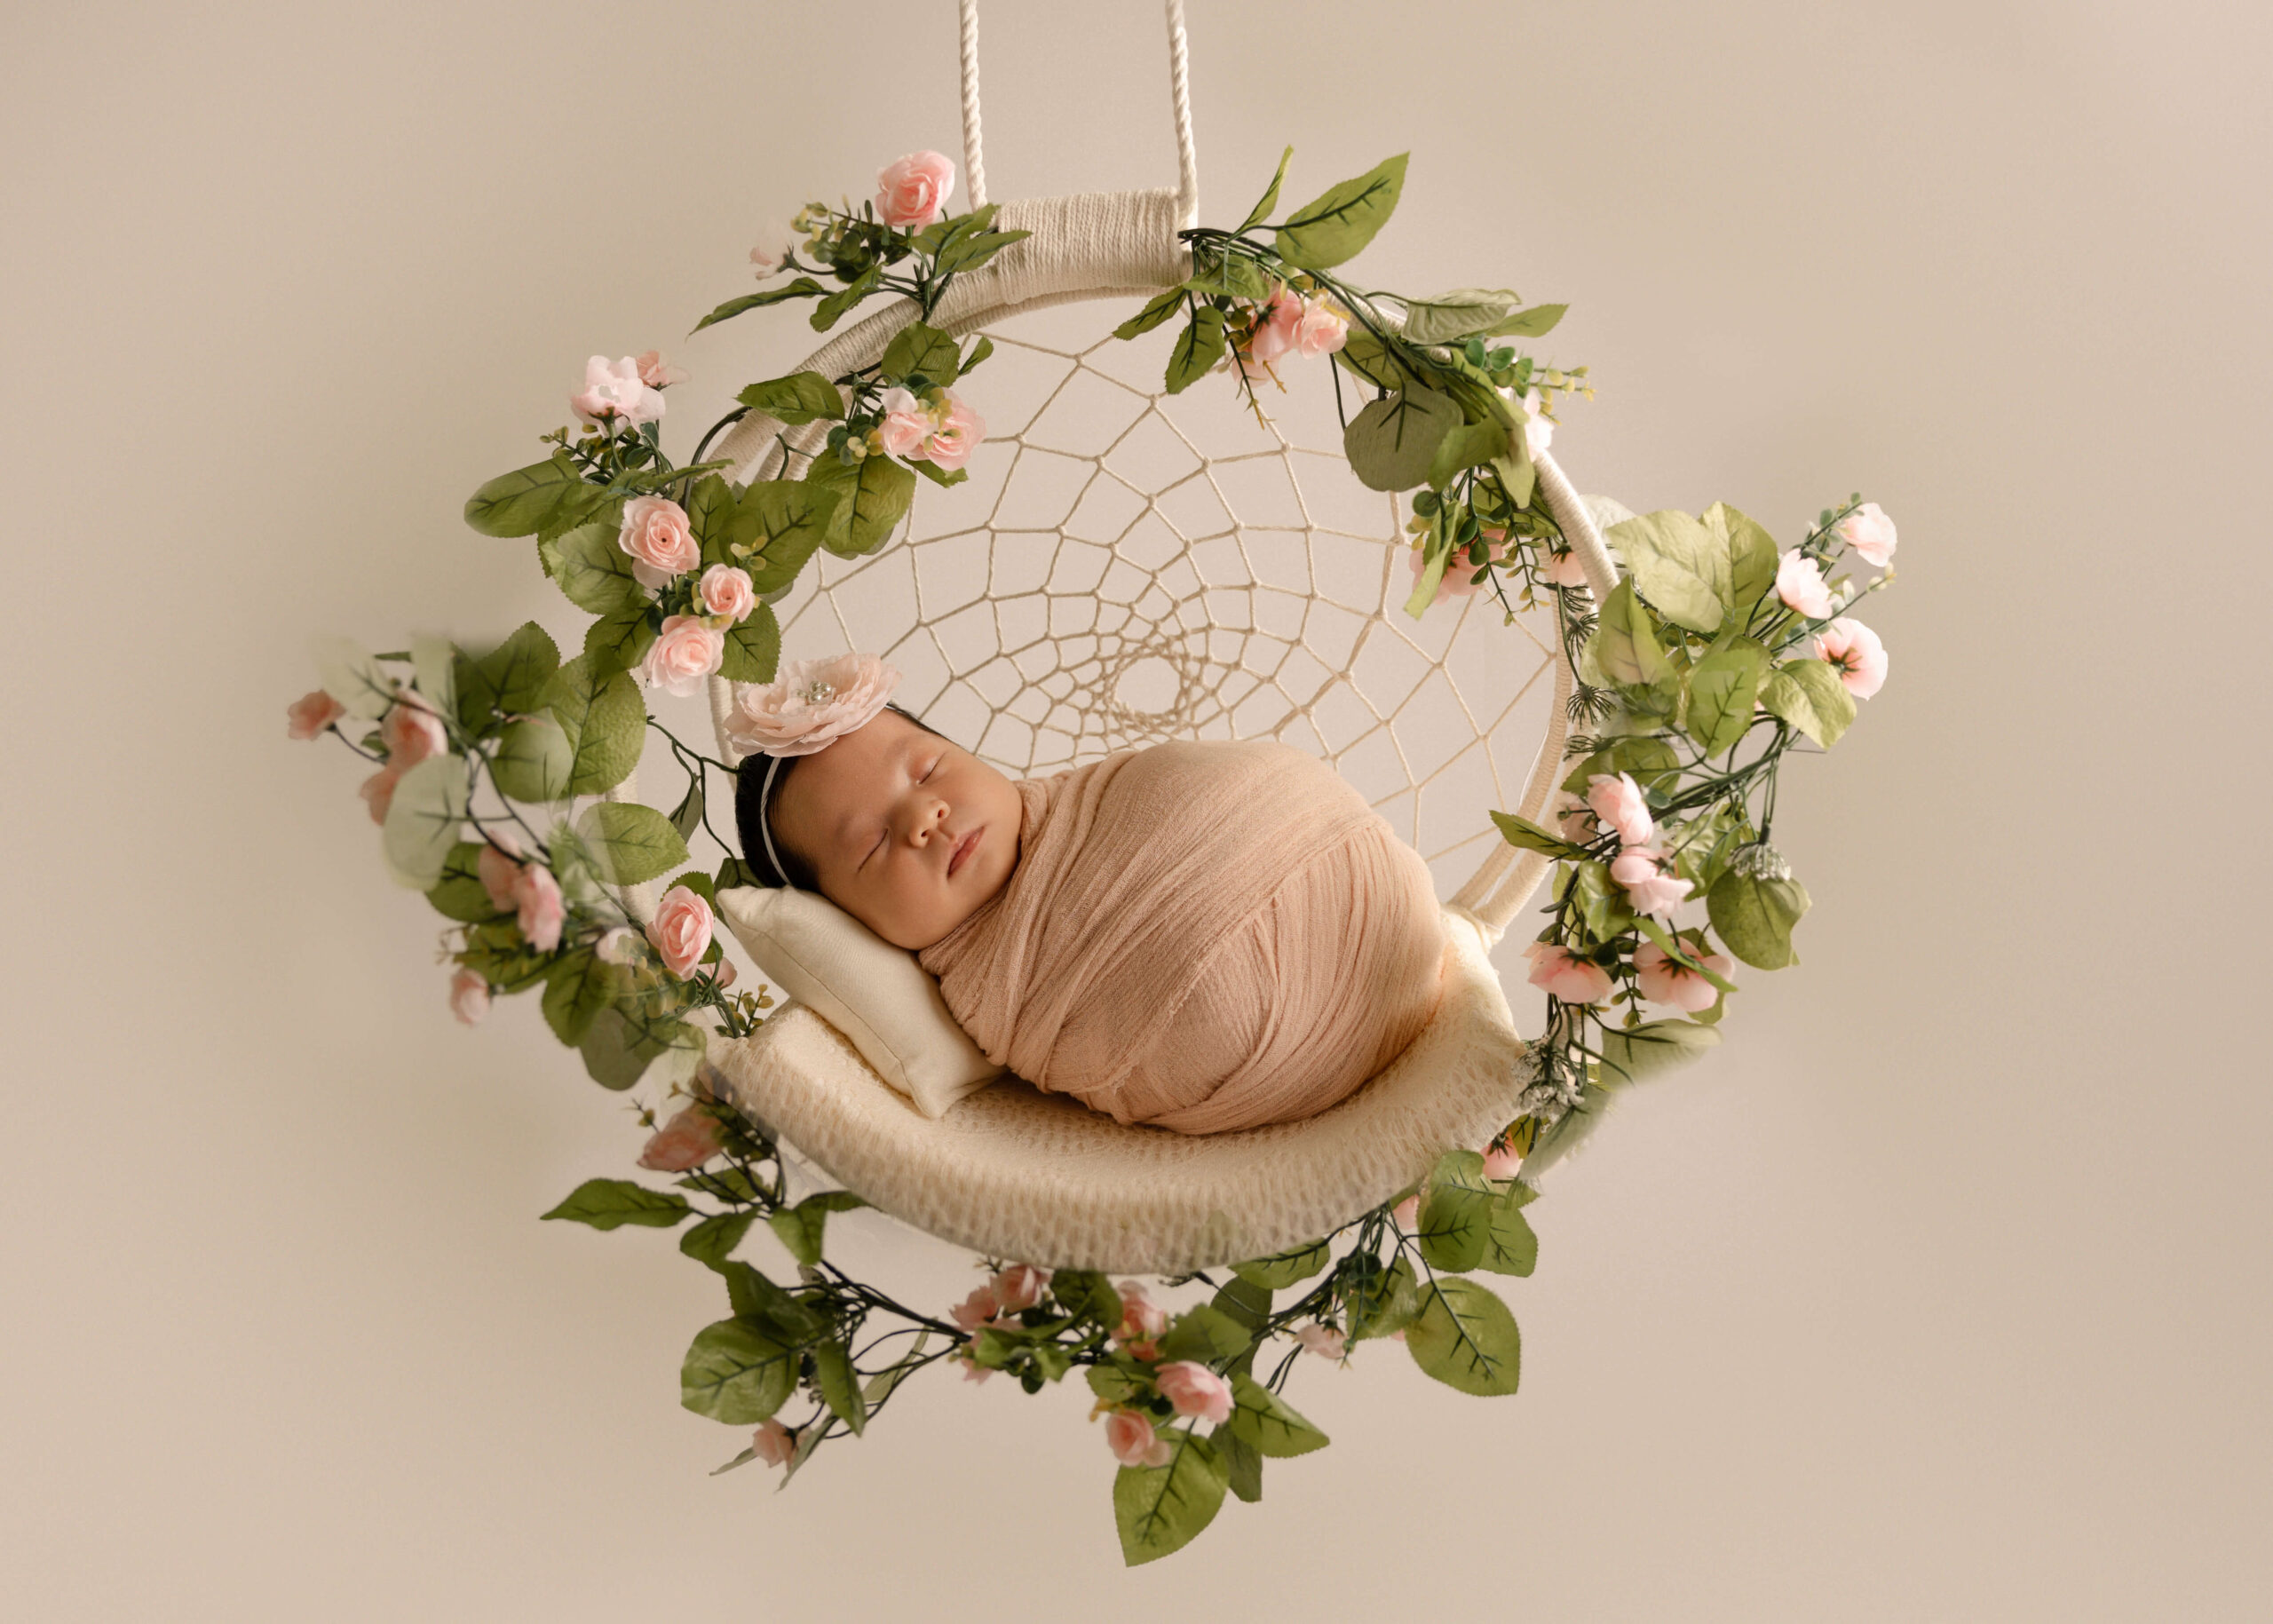 Baby sleeping wrapped in floral dream catcher in studio in Los Angeles by Ashley Nicole Photography.